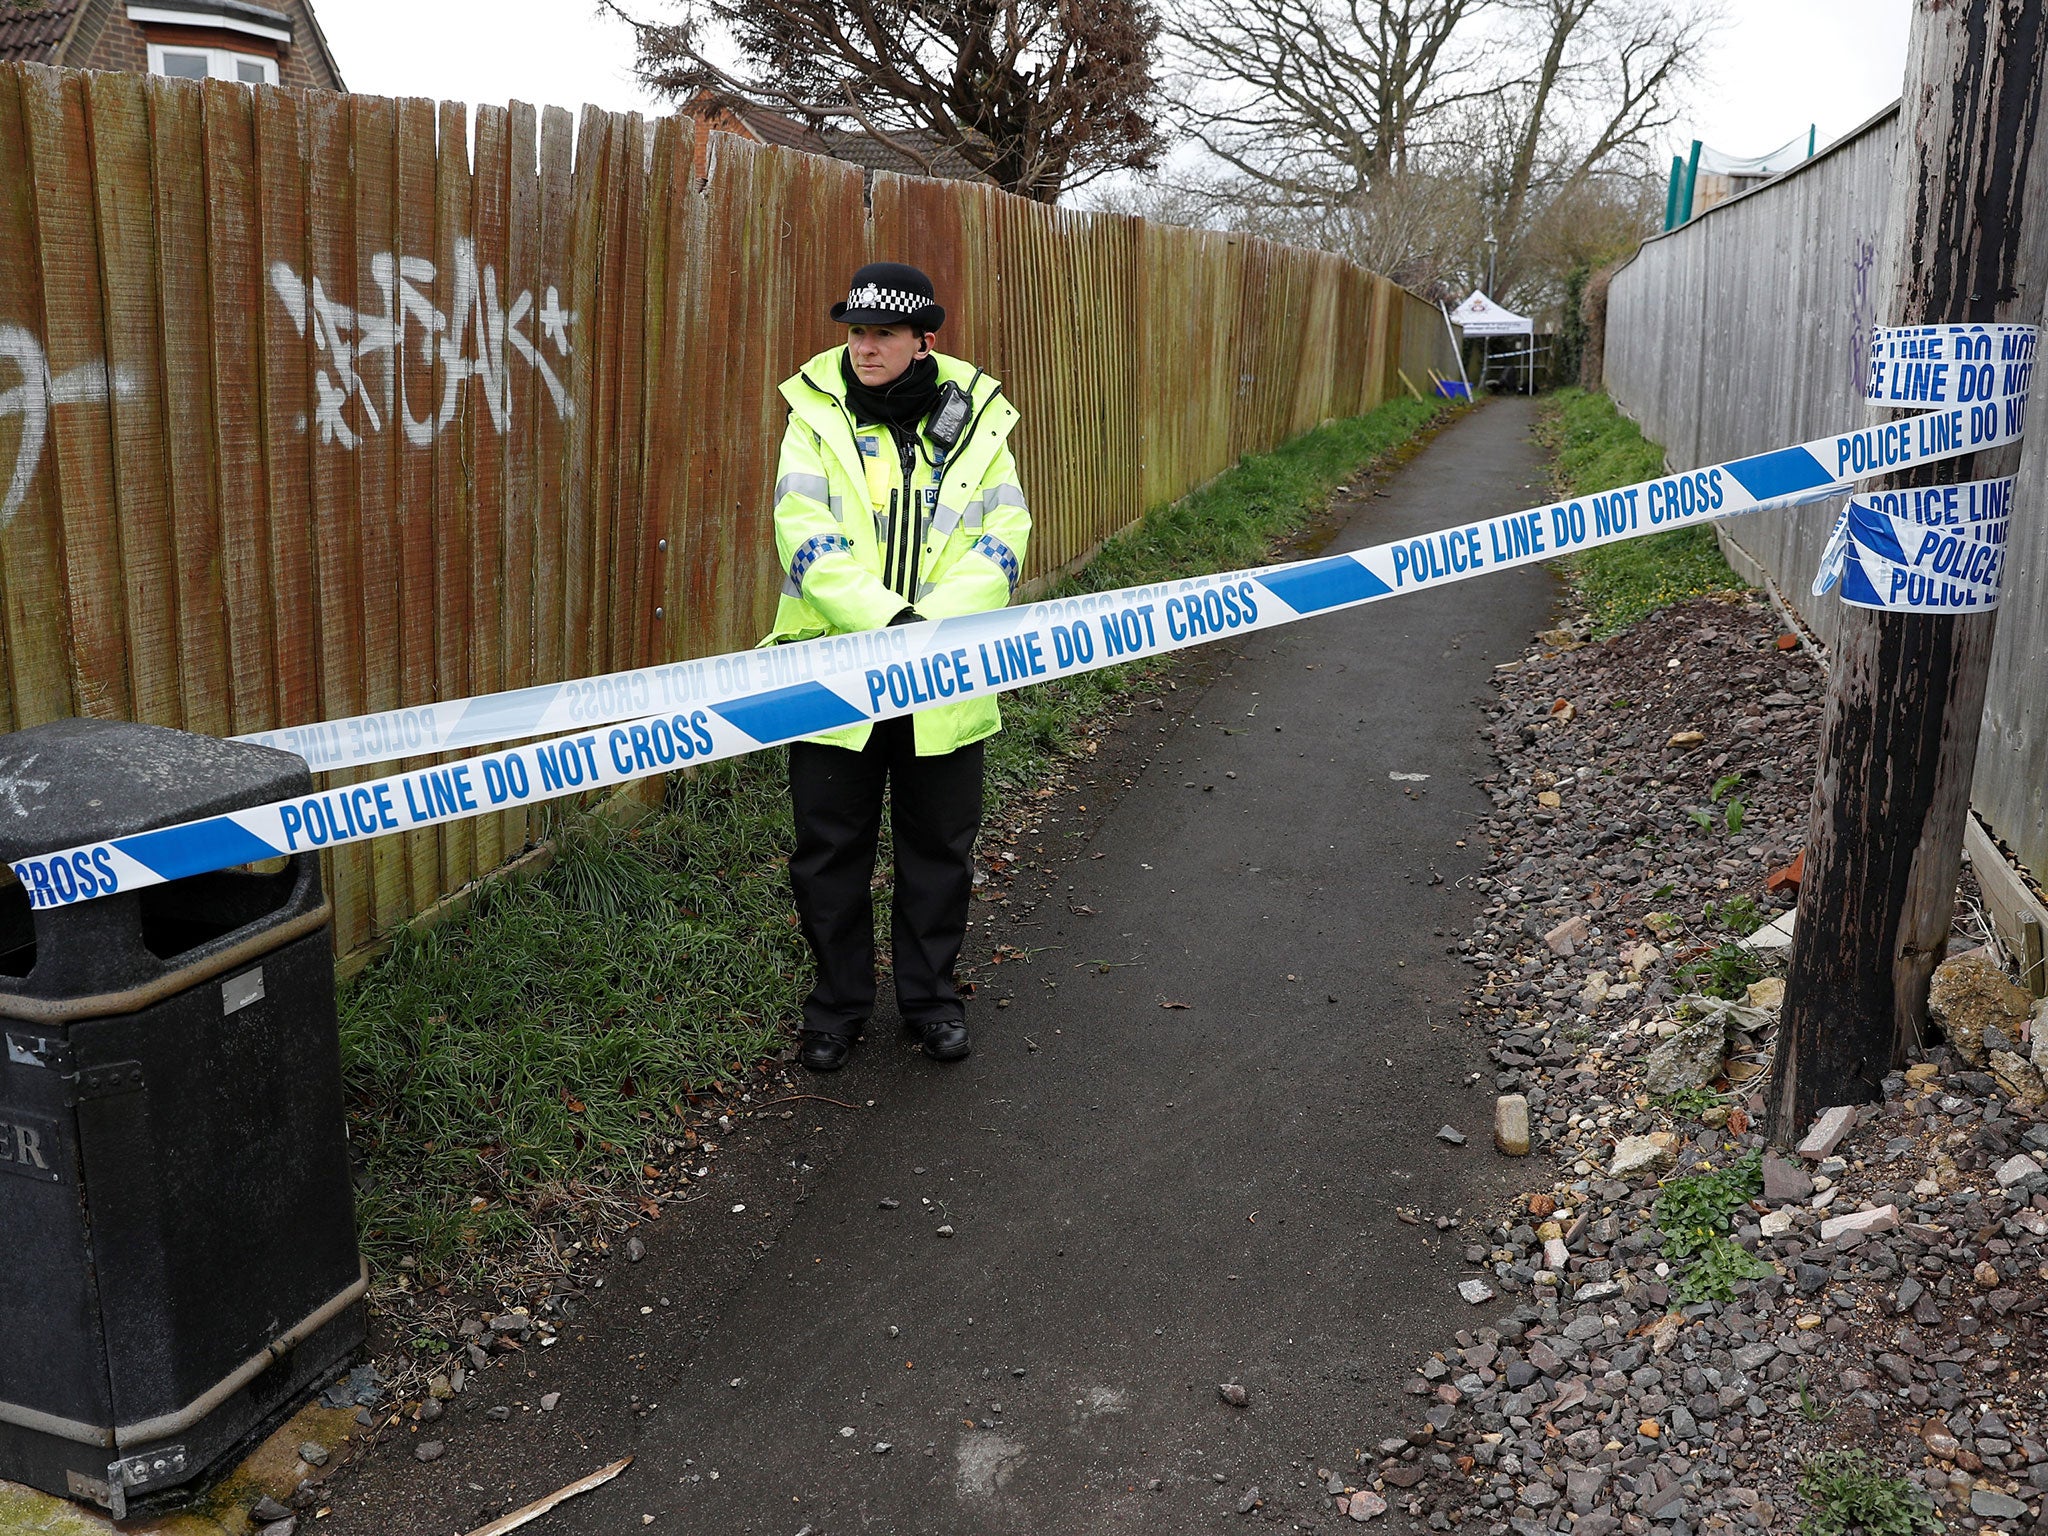 A police officer stands behind cordon tape in an alleyway which has been blocked off near the home of former Russian intelligence officer Sergei Skripal in Salisbury (REUTERS/Peter Nicholls)